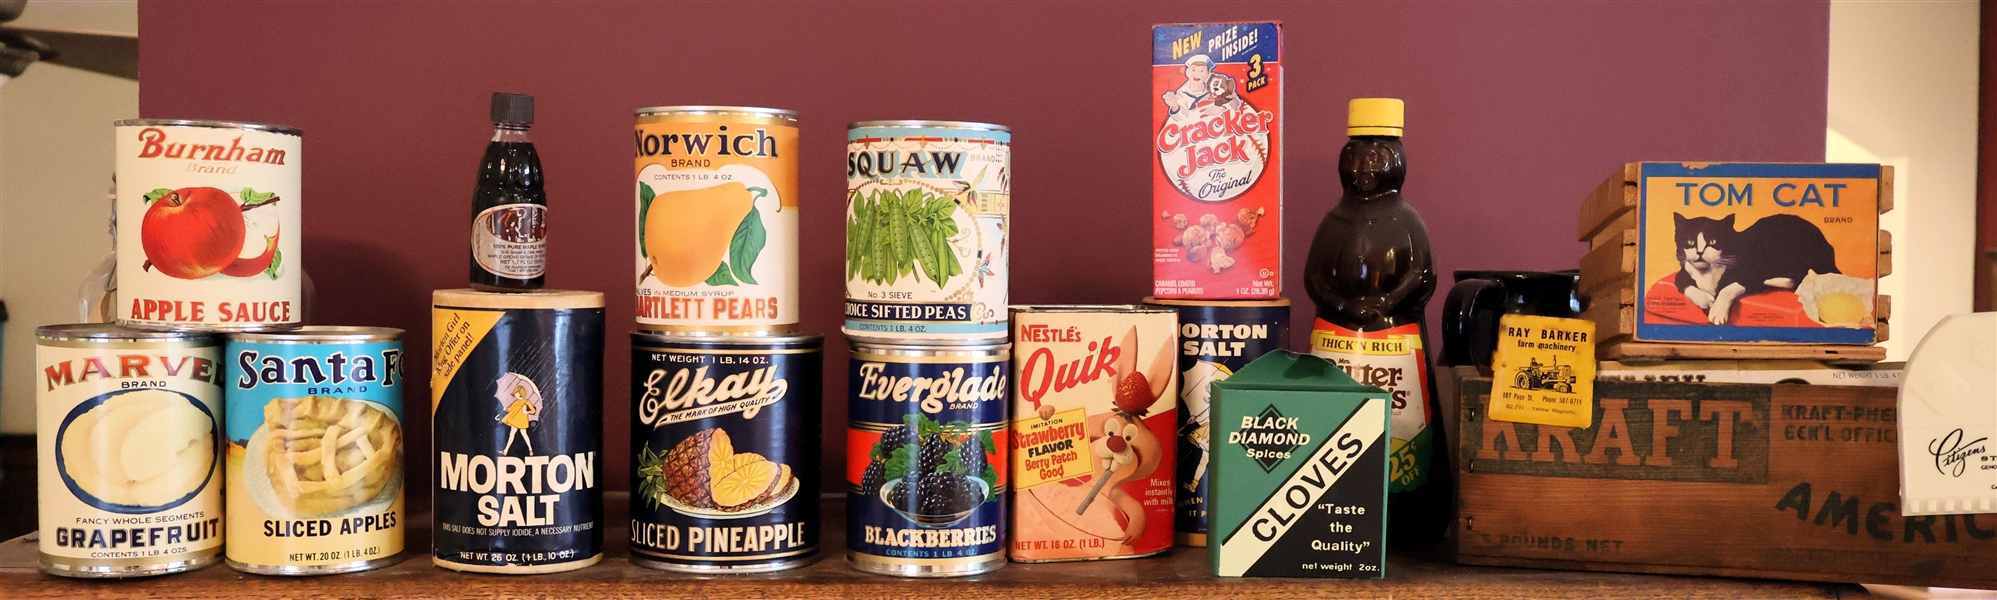 Collection of Vintage Tins and Boxes including Mortons Salt, Squaw Beans, Black Diamond Cloves, Cracker Jacks, Aunt Jemima Syrup, Tom Cat Citrus, Kraft American Cheese, and Others